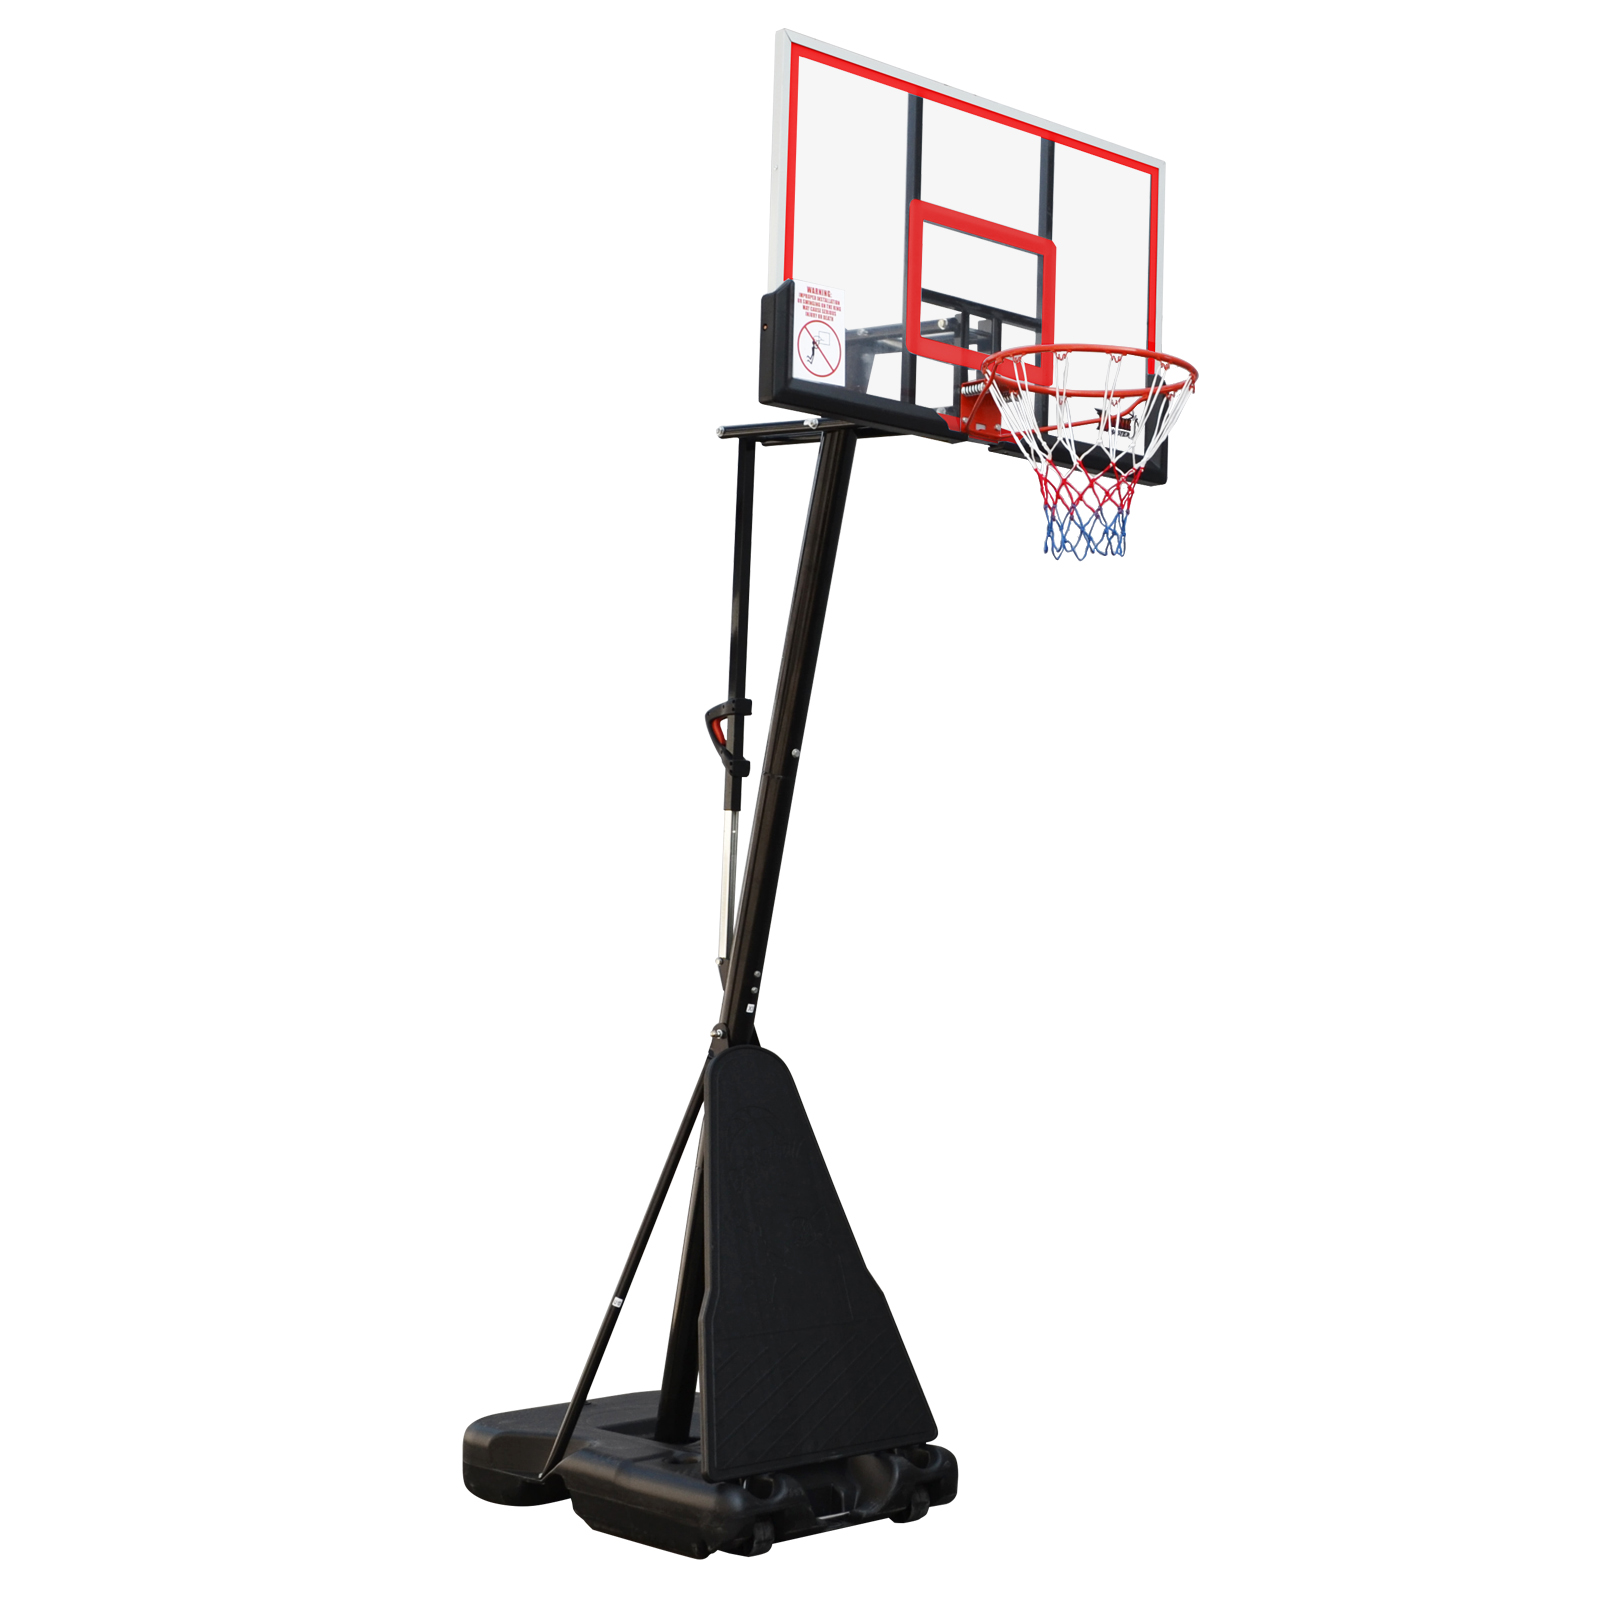 Dunk Master S024 Portable Basketball System - TRsports